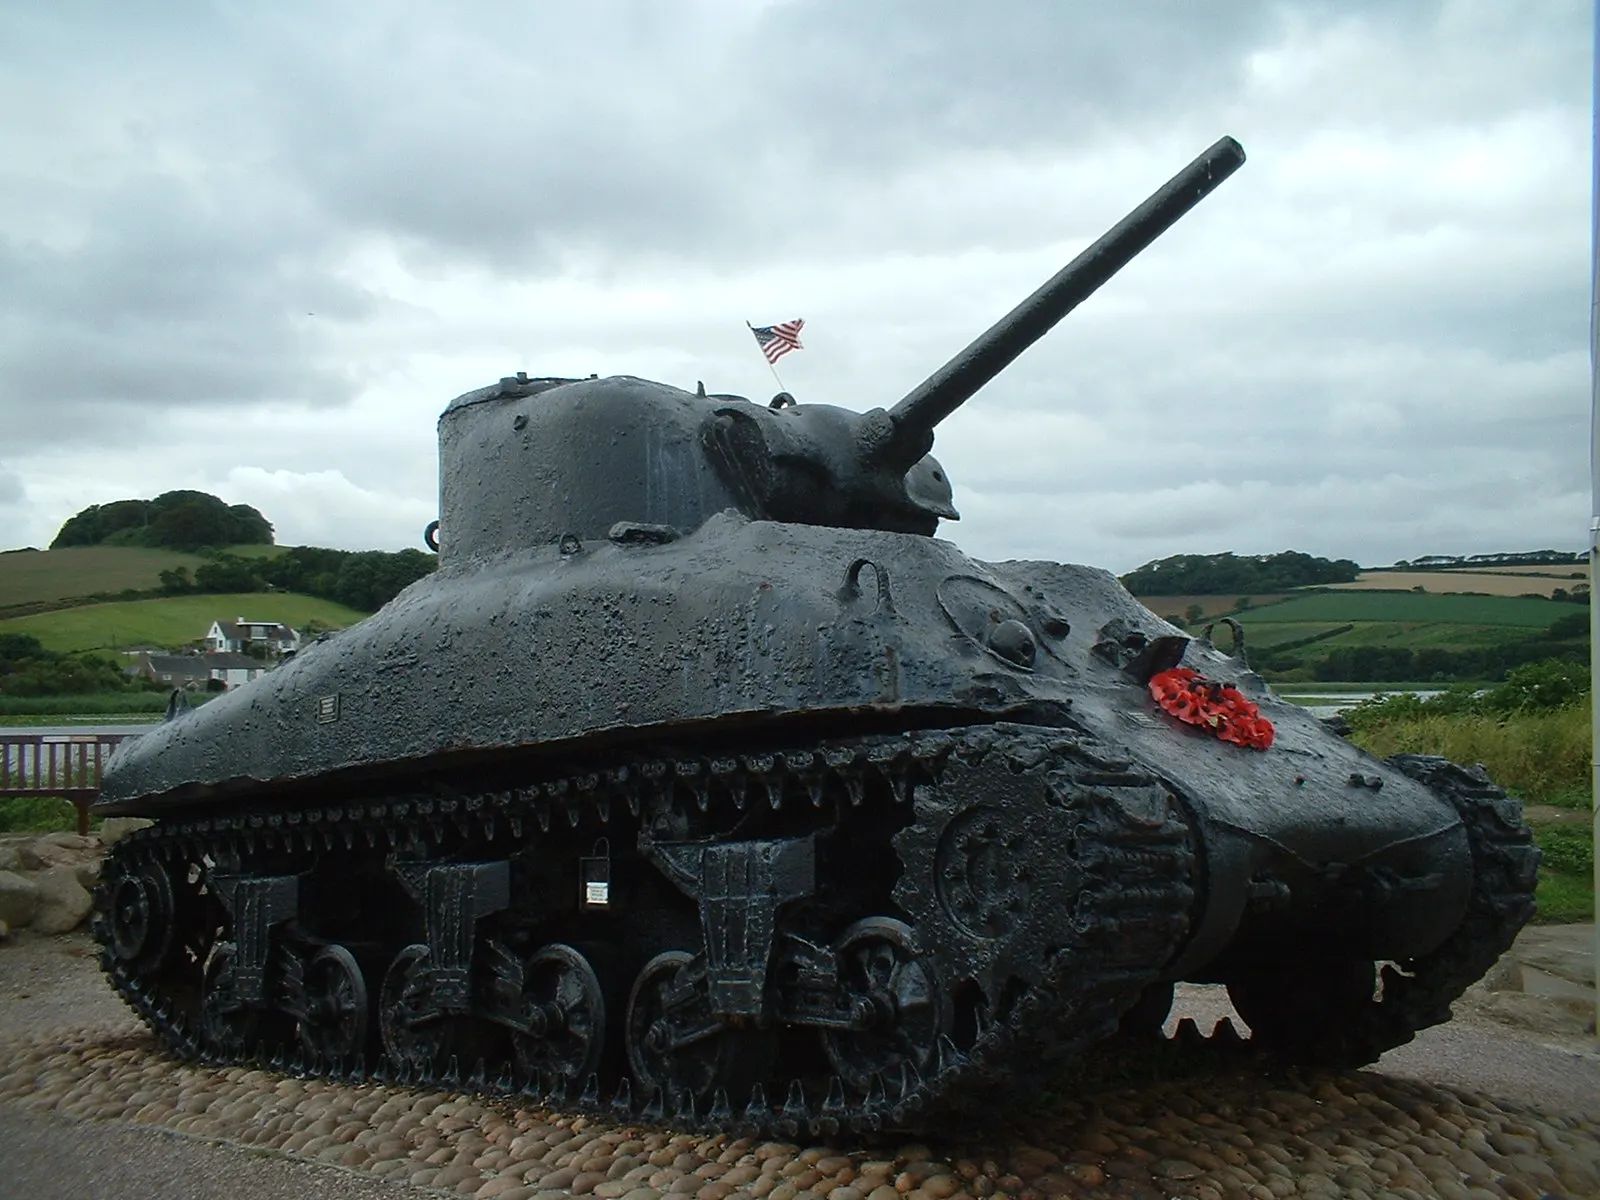 A photograaph of the aformentioned tank from before. The tank has a large flower up on its front chasis, and the water damage is clearly visible by the hull's color and texture.